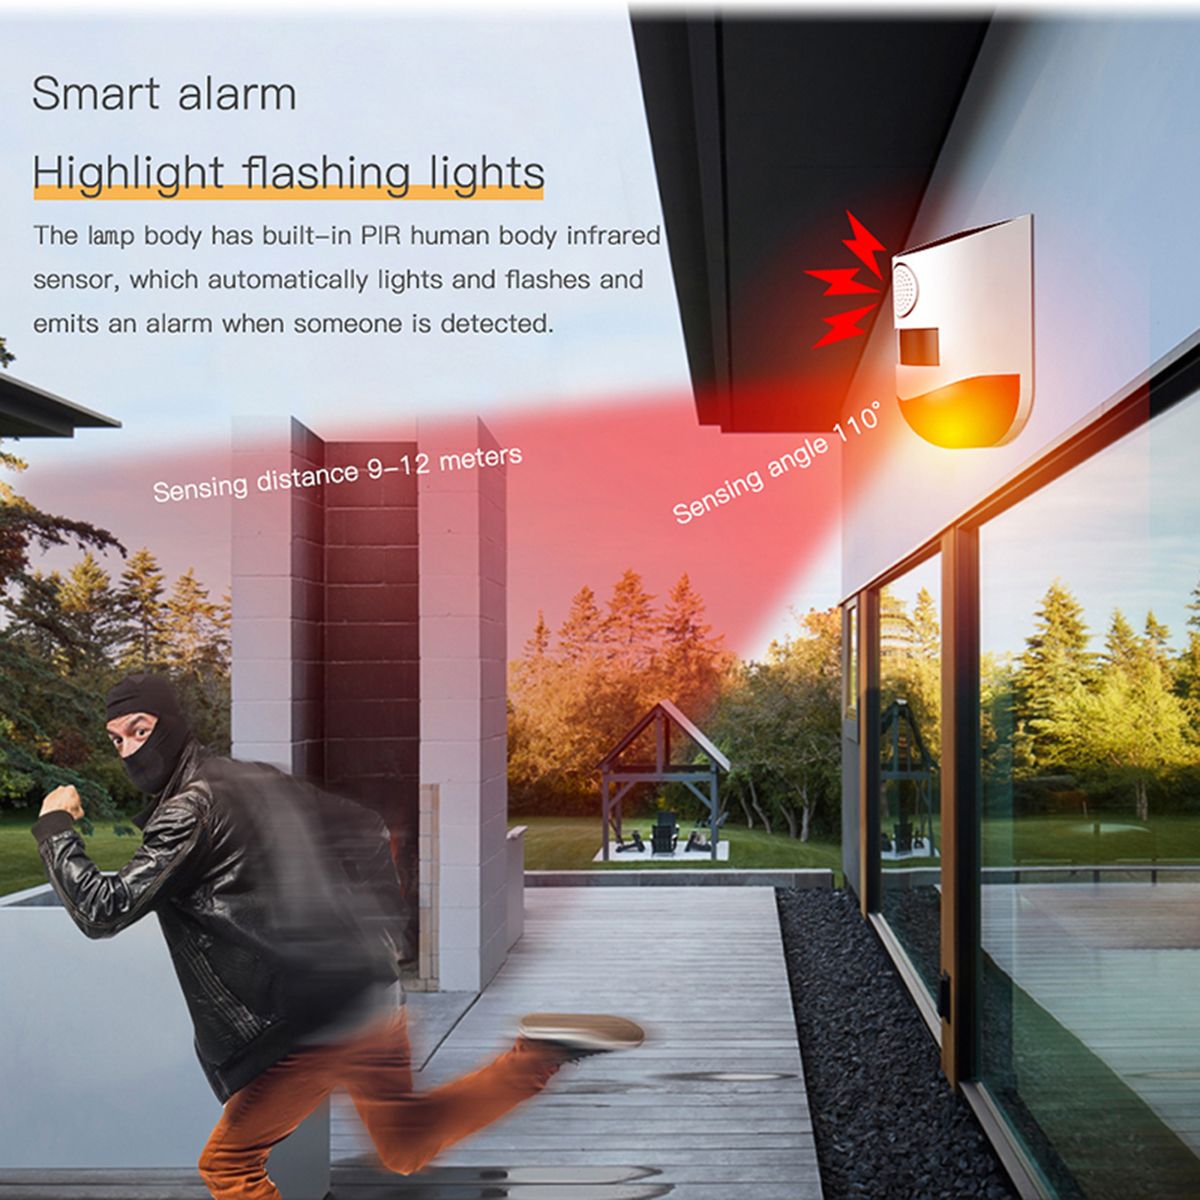 Waterproof-LED-Solar-Alarm-Light-Wireless-Flashing-Security-Wall-Lamp-for-Outdoor-Garden-with-Remote-1730831